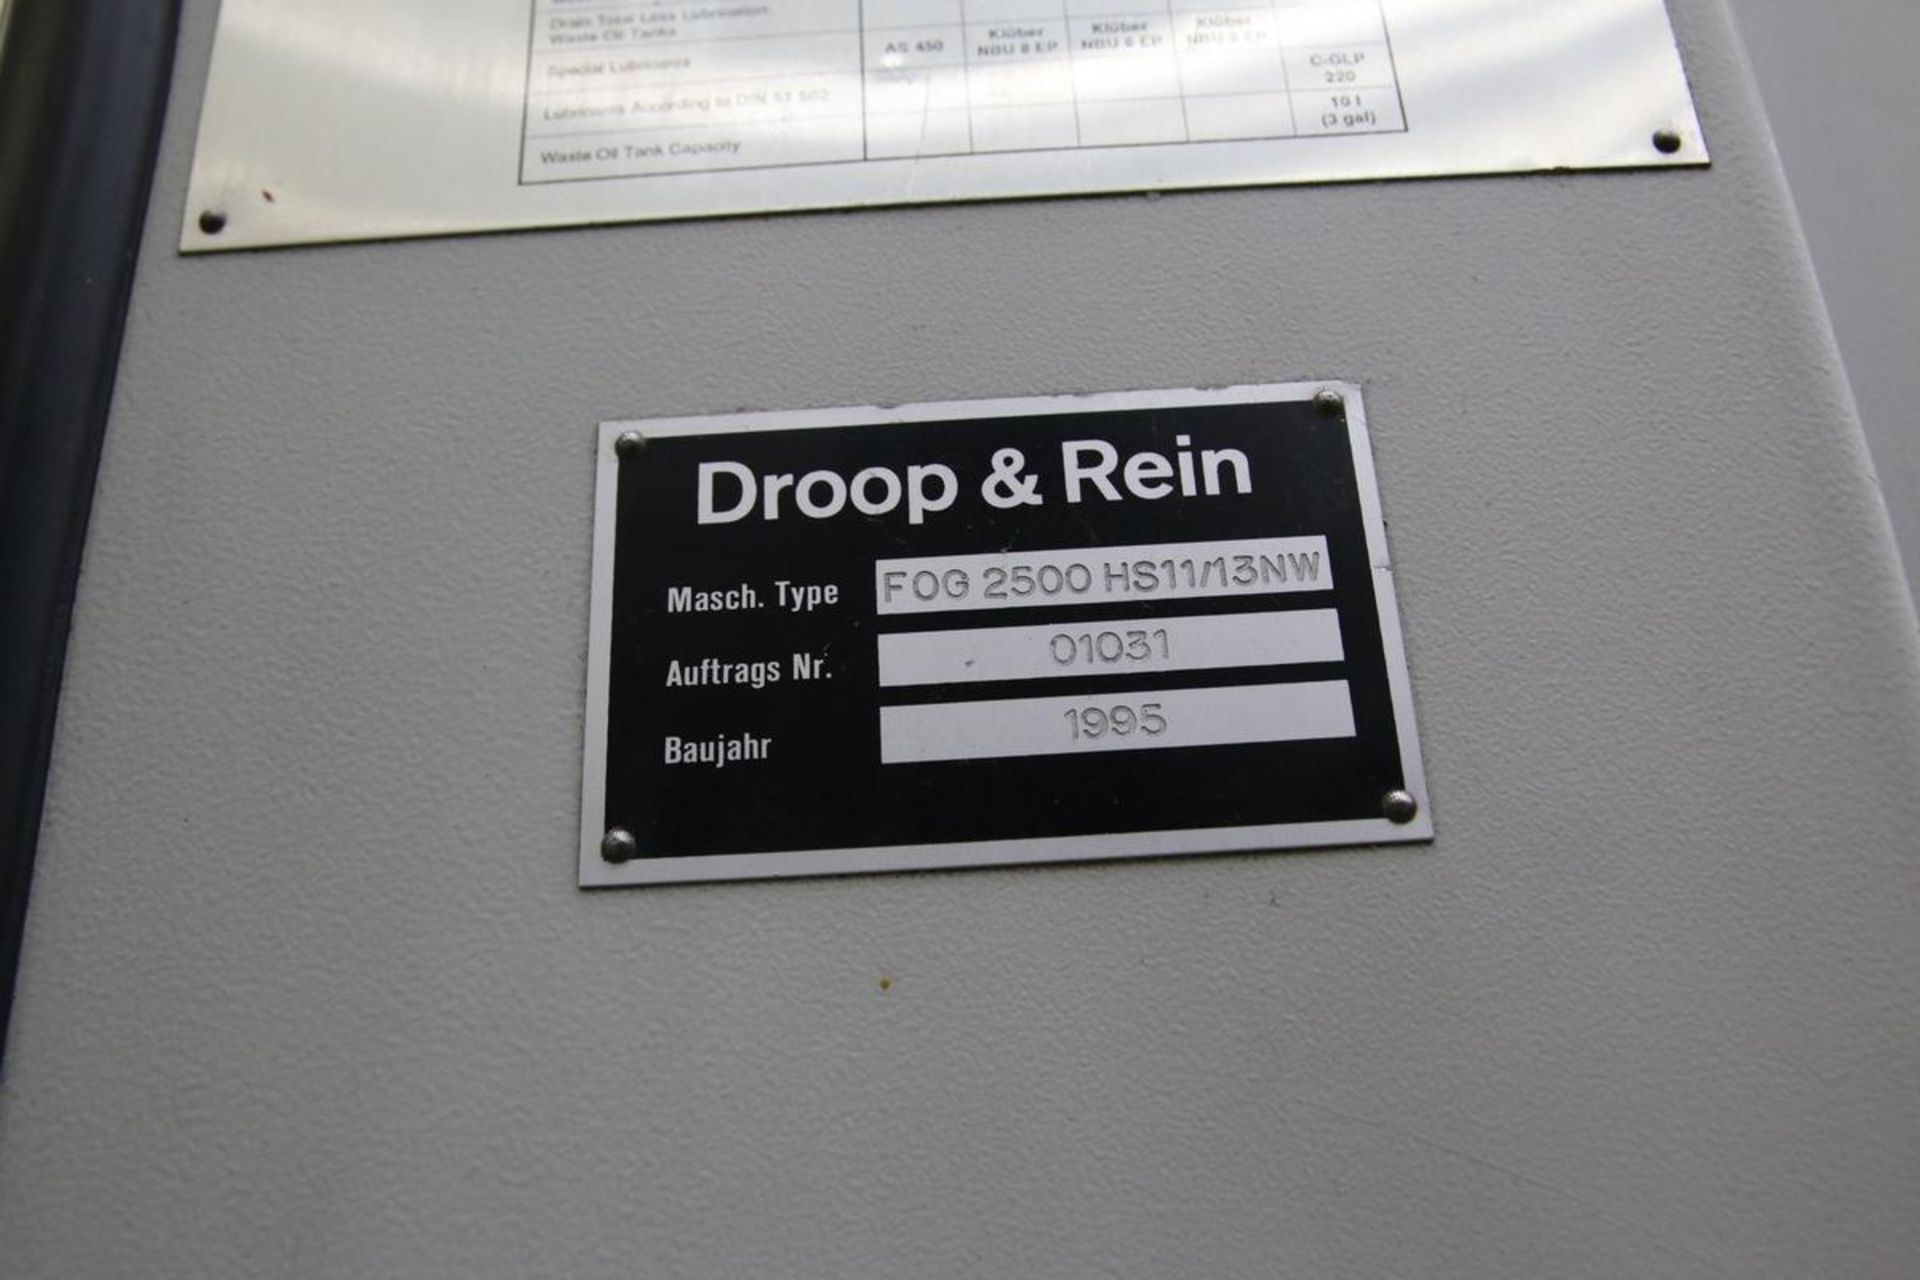 1995 Droop & Rein FOG 2500 HS11/13NW 5-Axis CNC High Speed Gantry Mill - Image 31 of 32